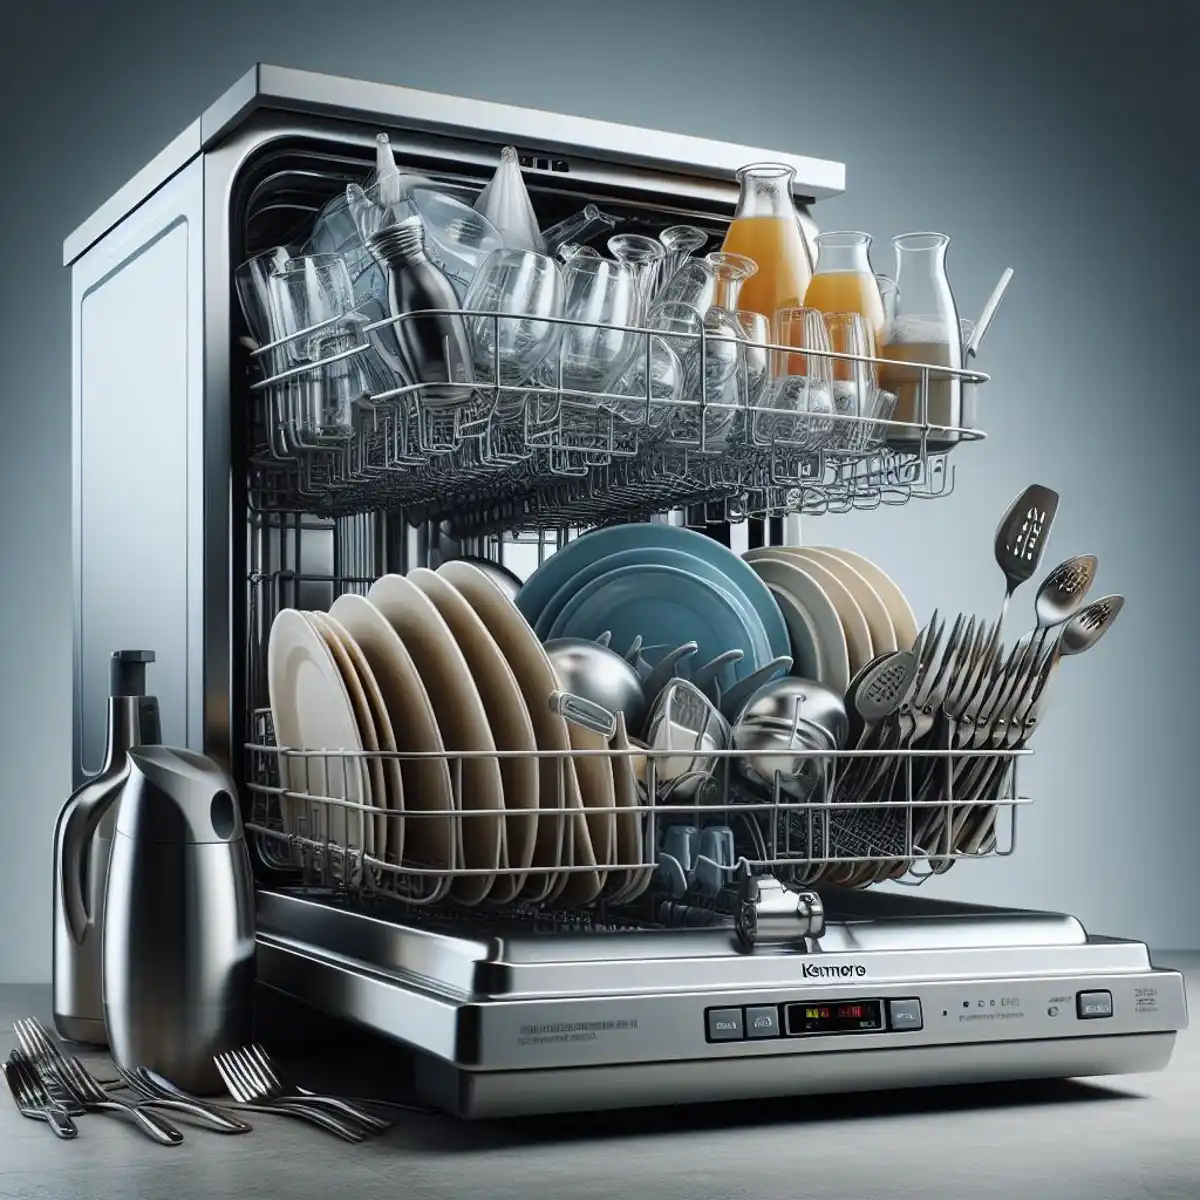 Kenmore dishwasher model 665 specifications